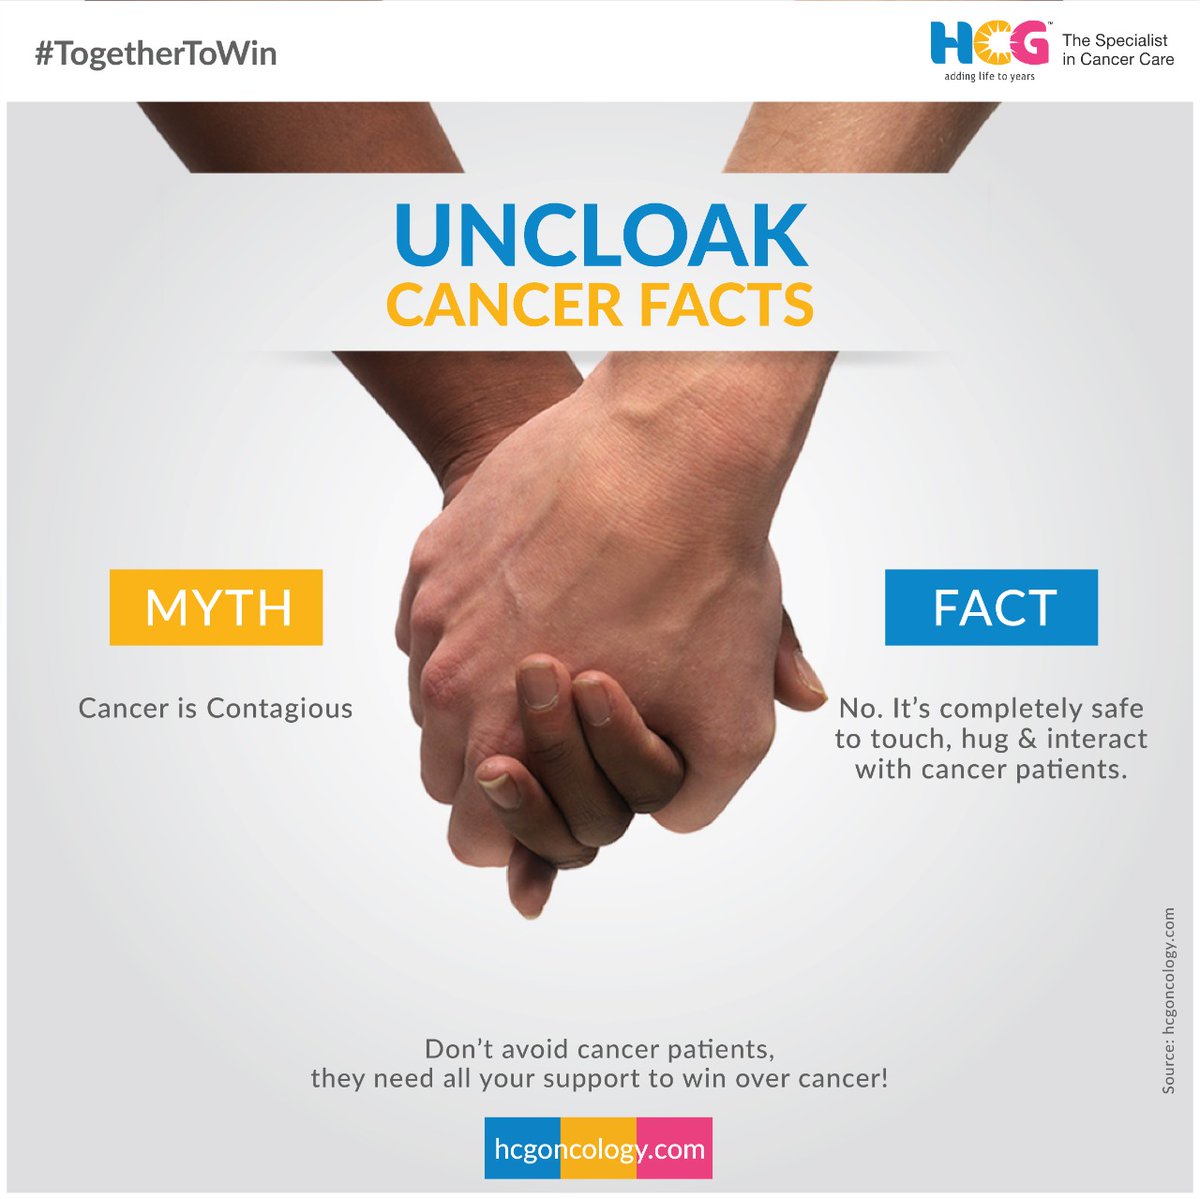 Stay one step ahead of cancer with HCG’s preventive screening programme. Visit for more hcgoncology.com

#HCGOncology #TogetherToWin #CancerMyths #CancerFacts #HCG #CancerCare #CancerExperts #UncloakCancerFacts